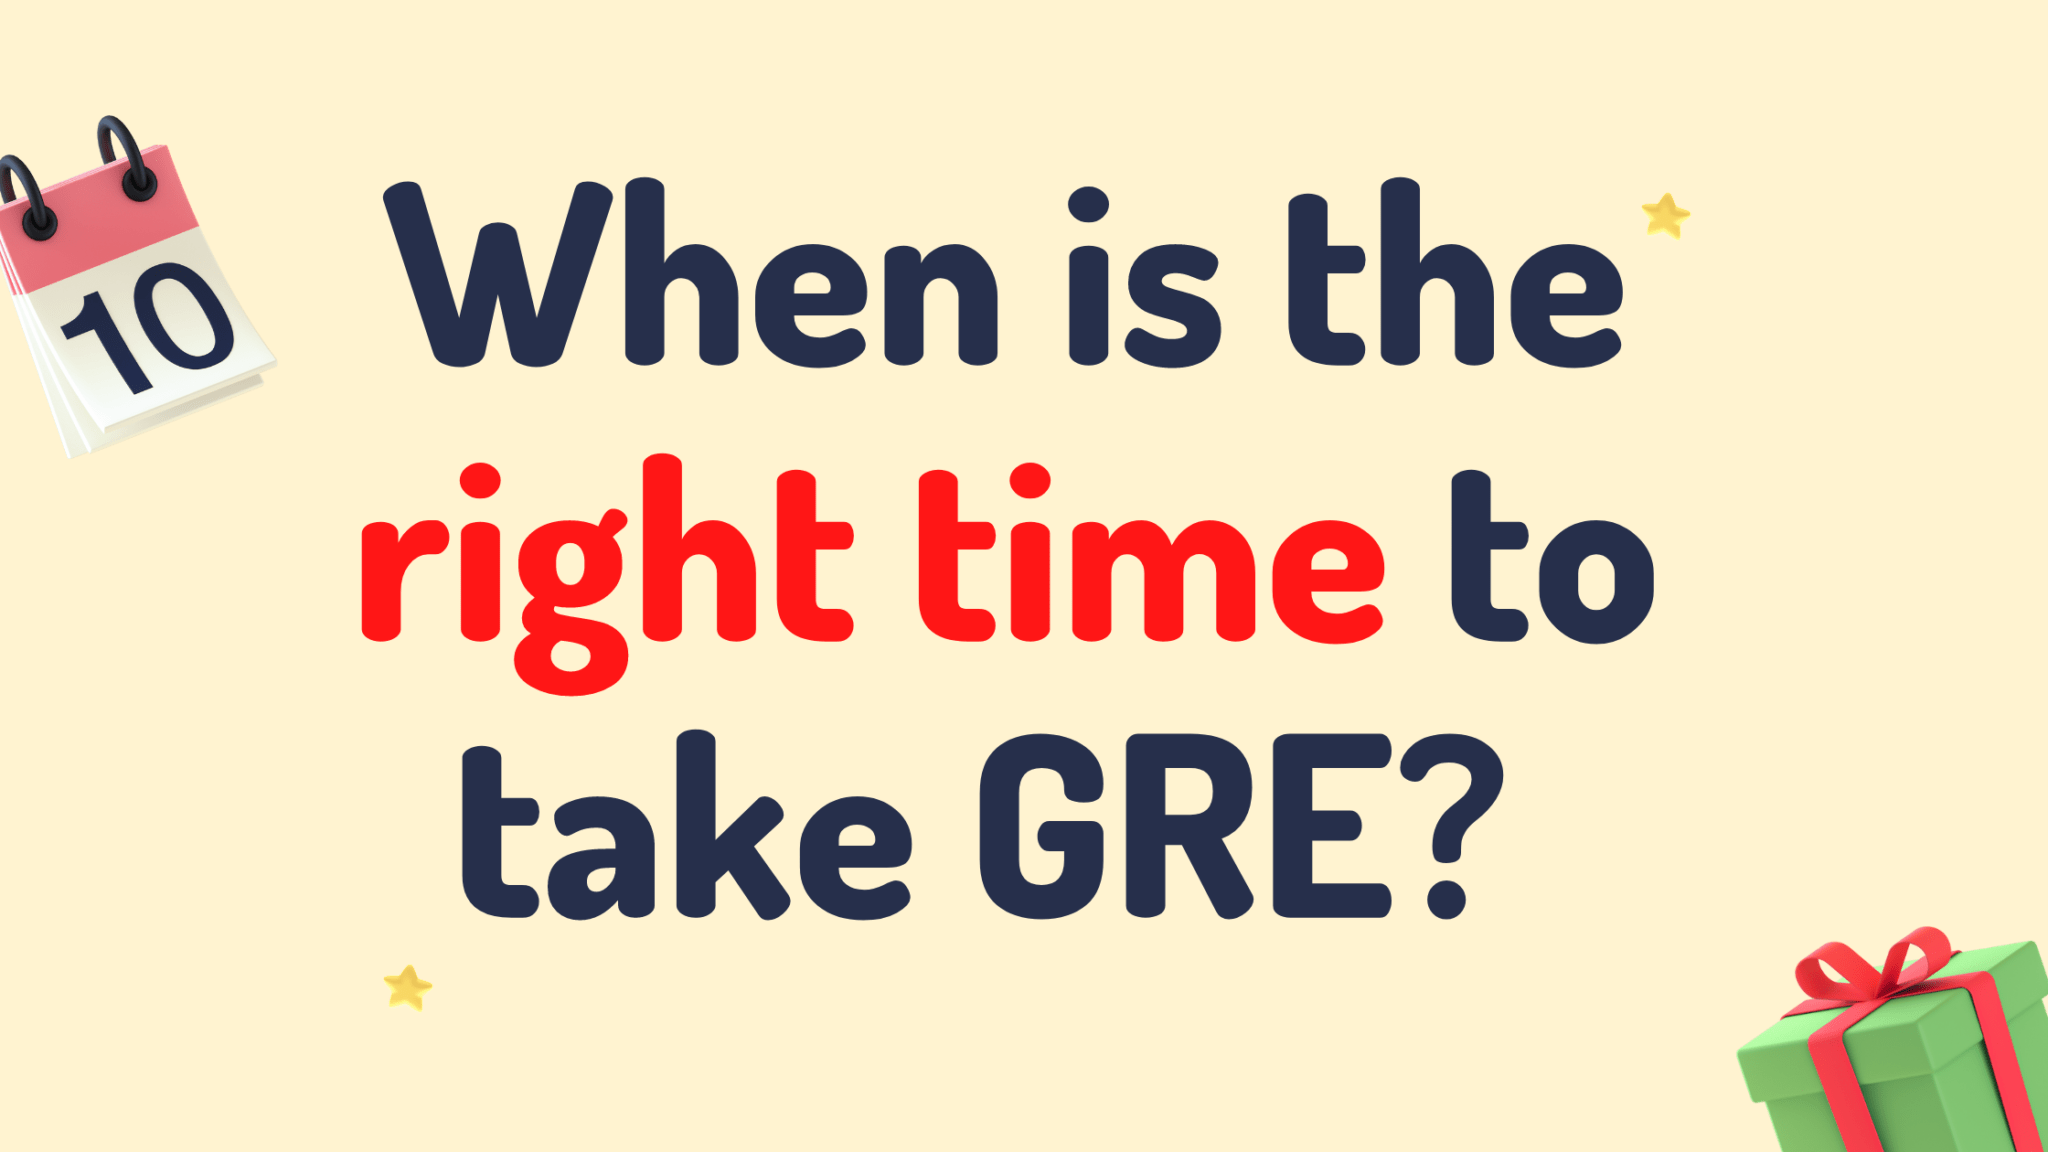 When is the right time to take GRE?